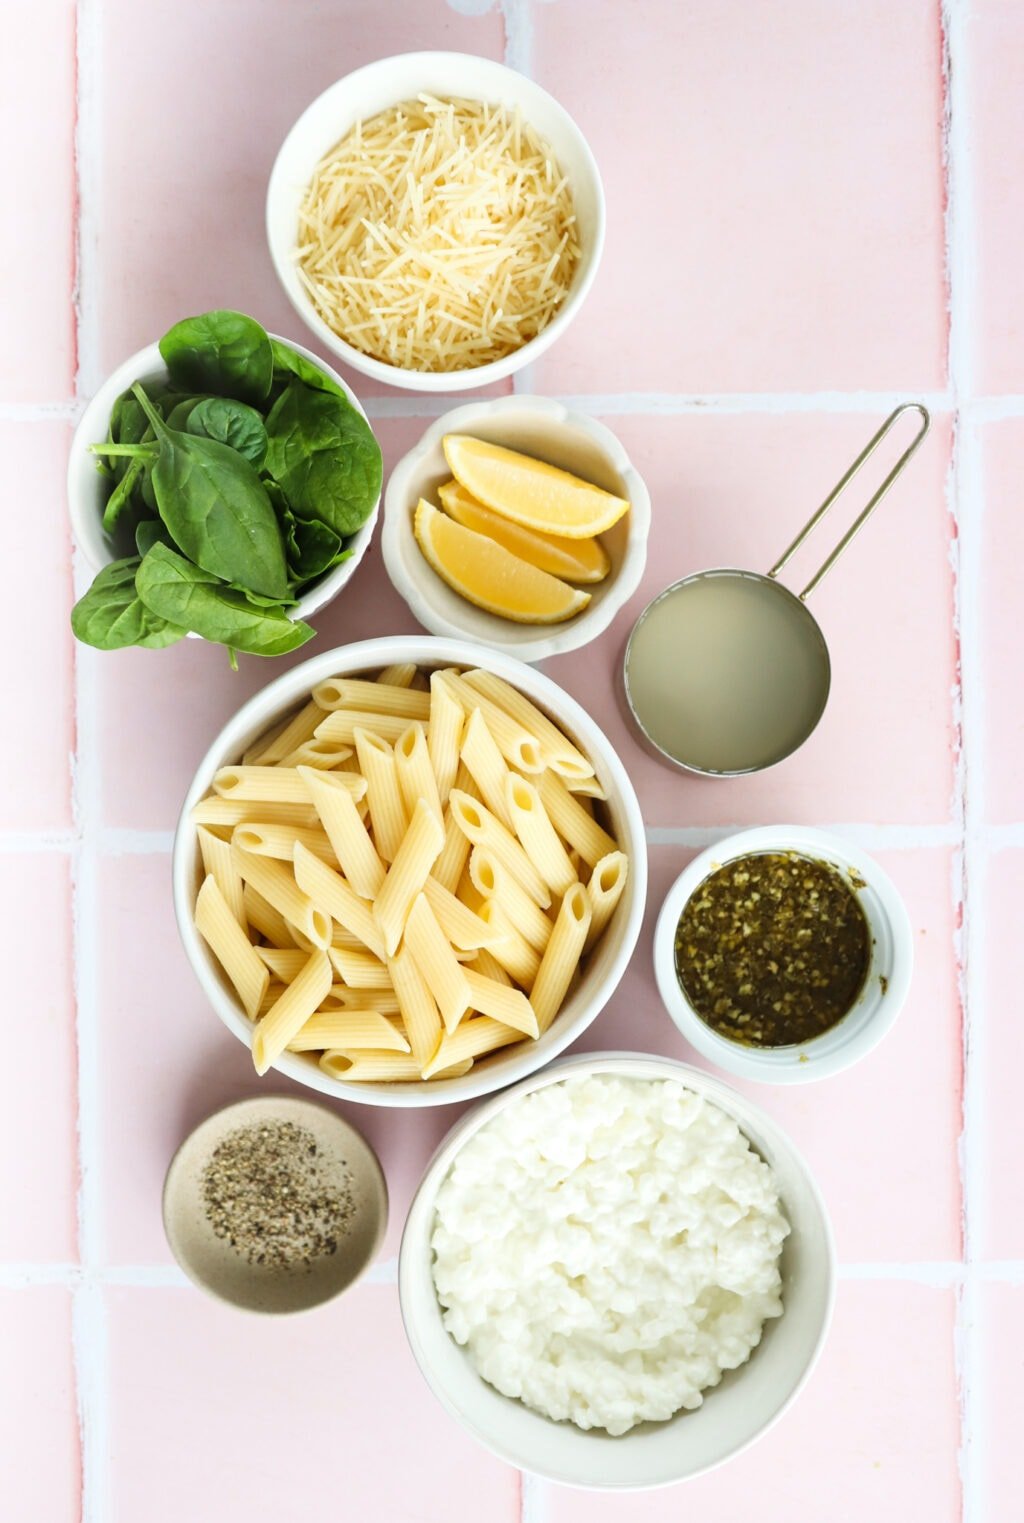 Ingredients for 20 minute pesto cottage cheese pasta in small white bowls, including pasta noodles, pasta water, cottage cheese, pesto, spinach, salt and pepper, parmesan cheese, lemon wedges